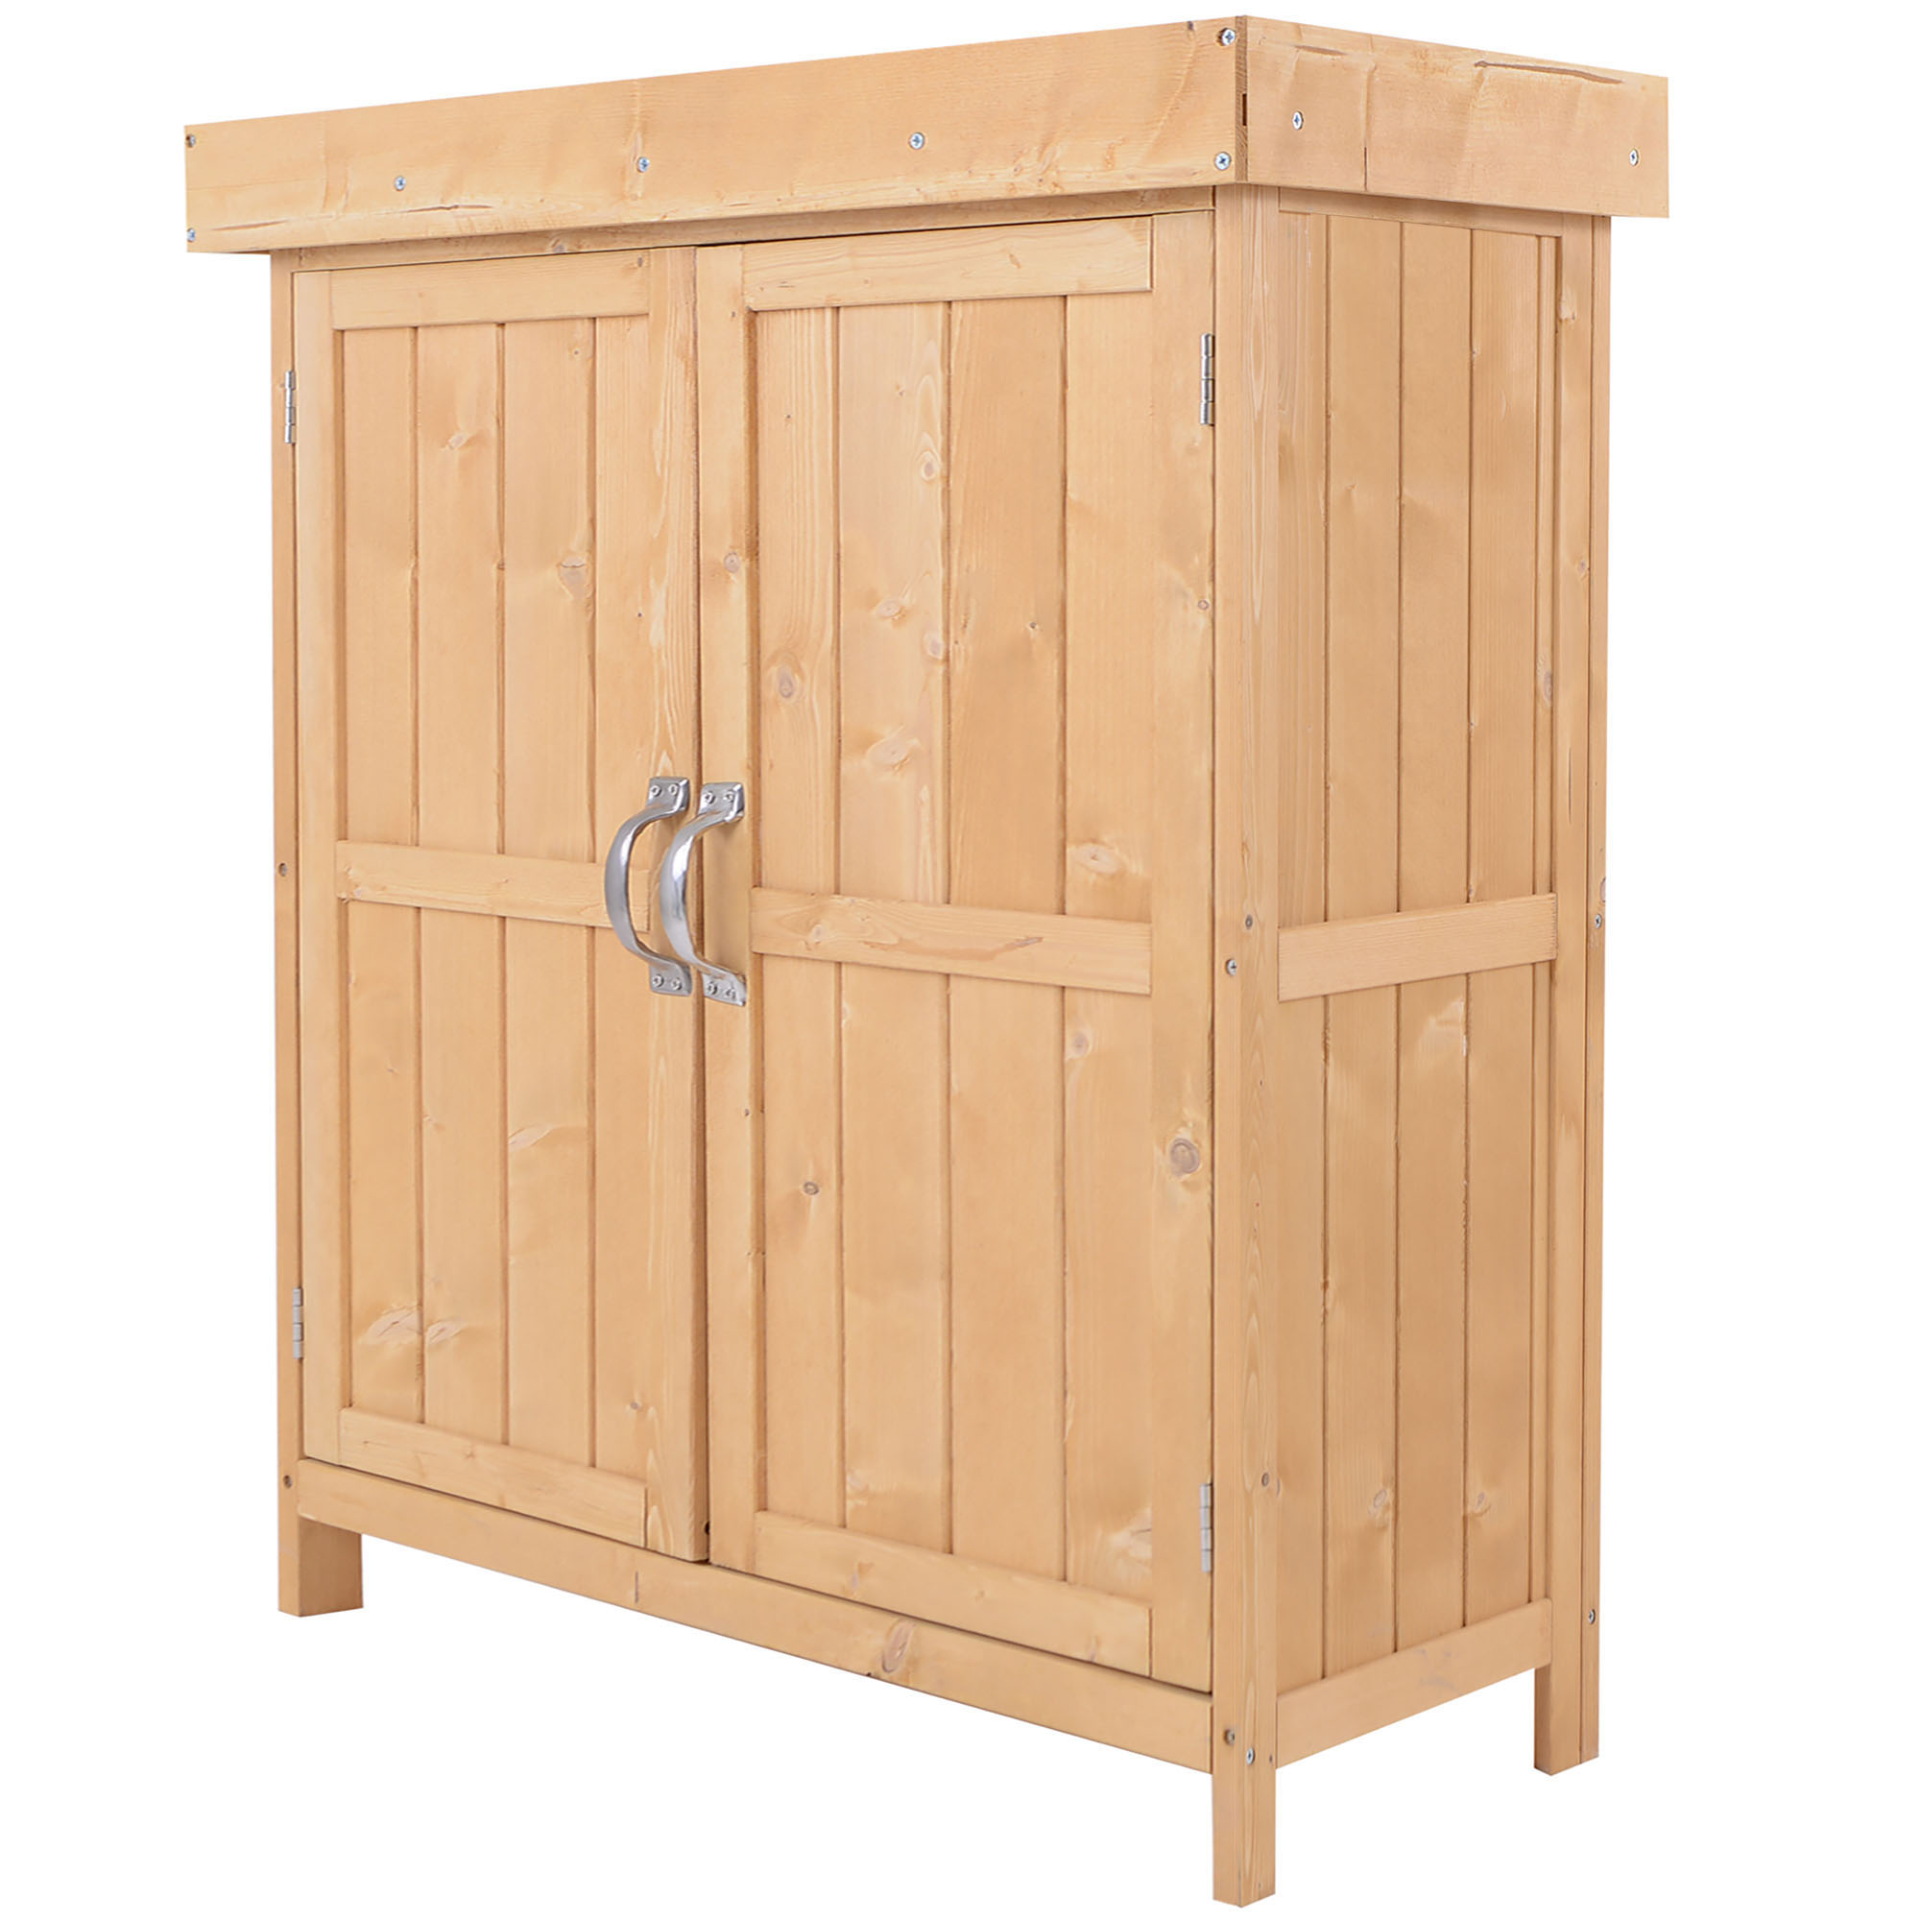 Garden Shed Outdoor Garden Storage Shed Wooden Chest Double Doors with Shelf Hin